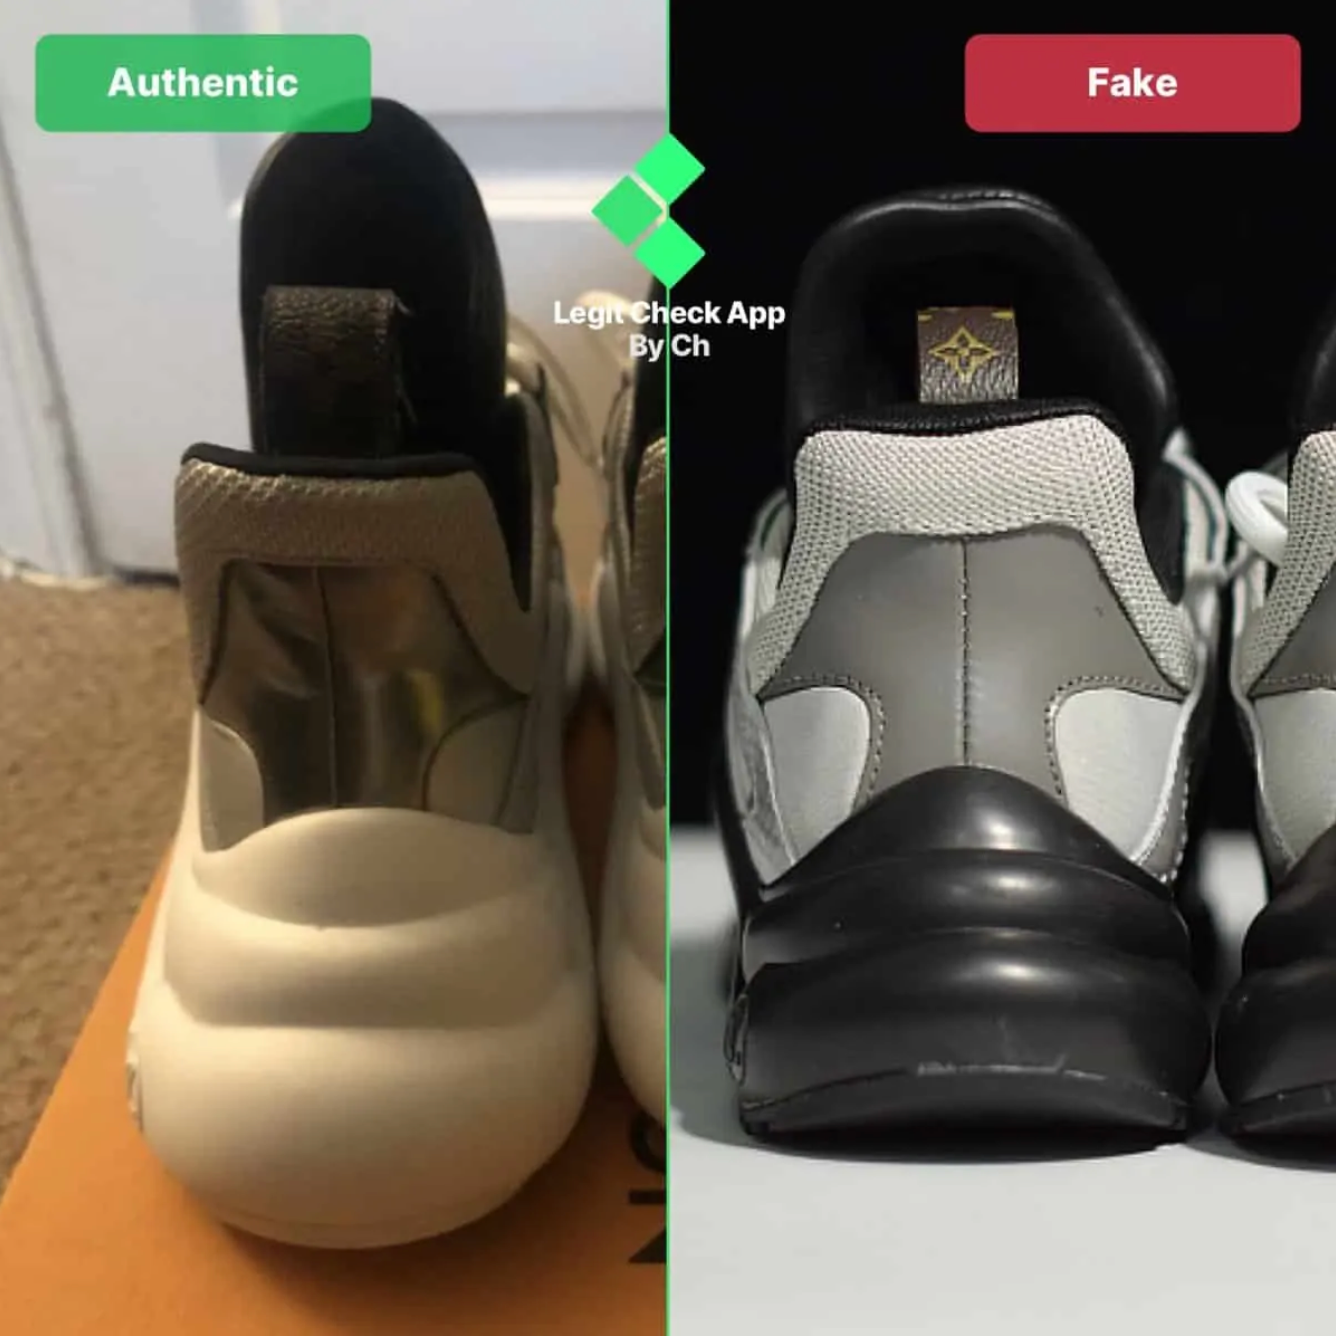 Louis Vuitton Archlight sneakers real vs fake. How to spot